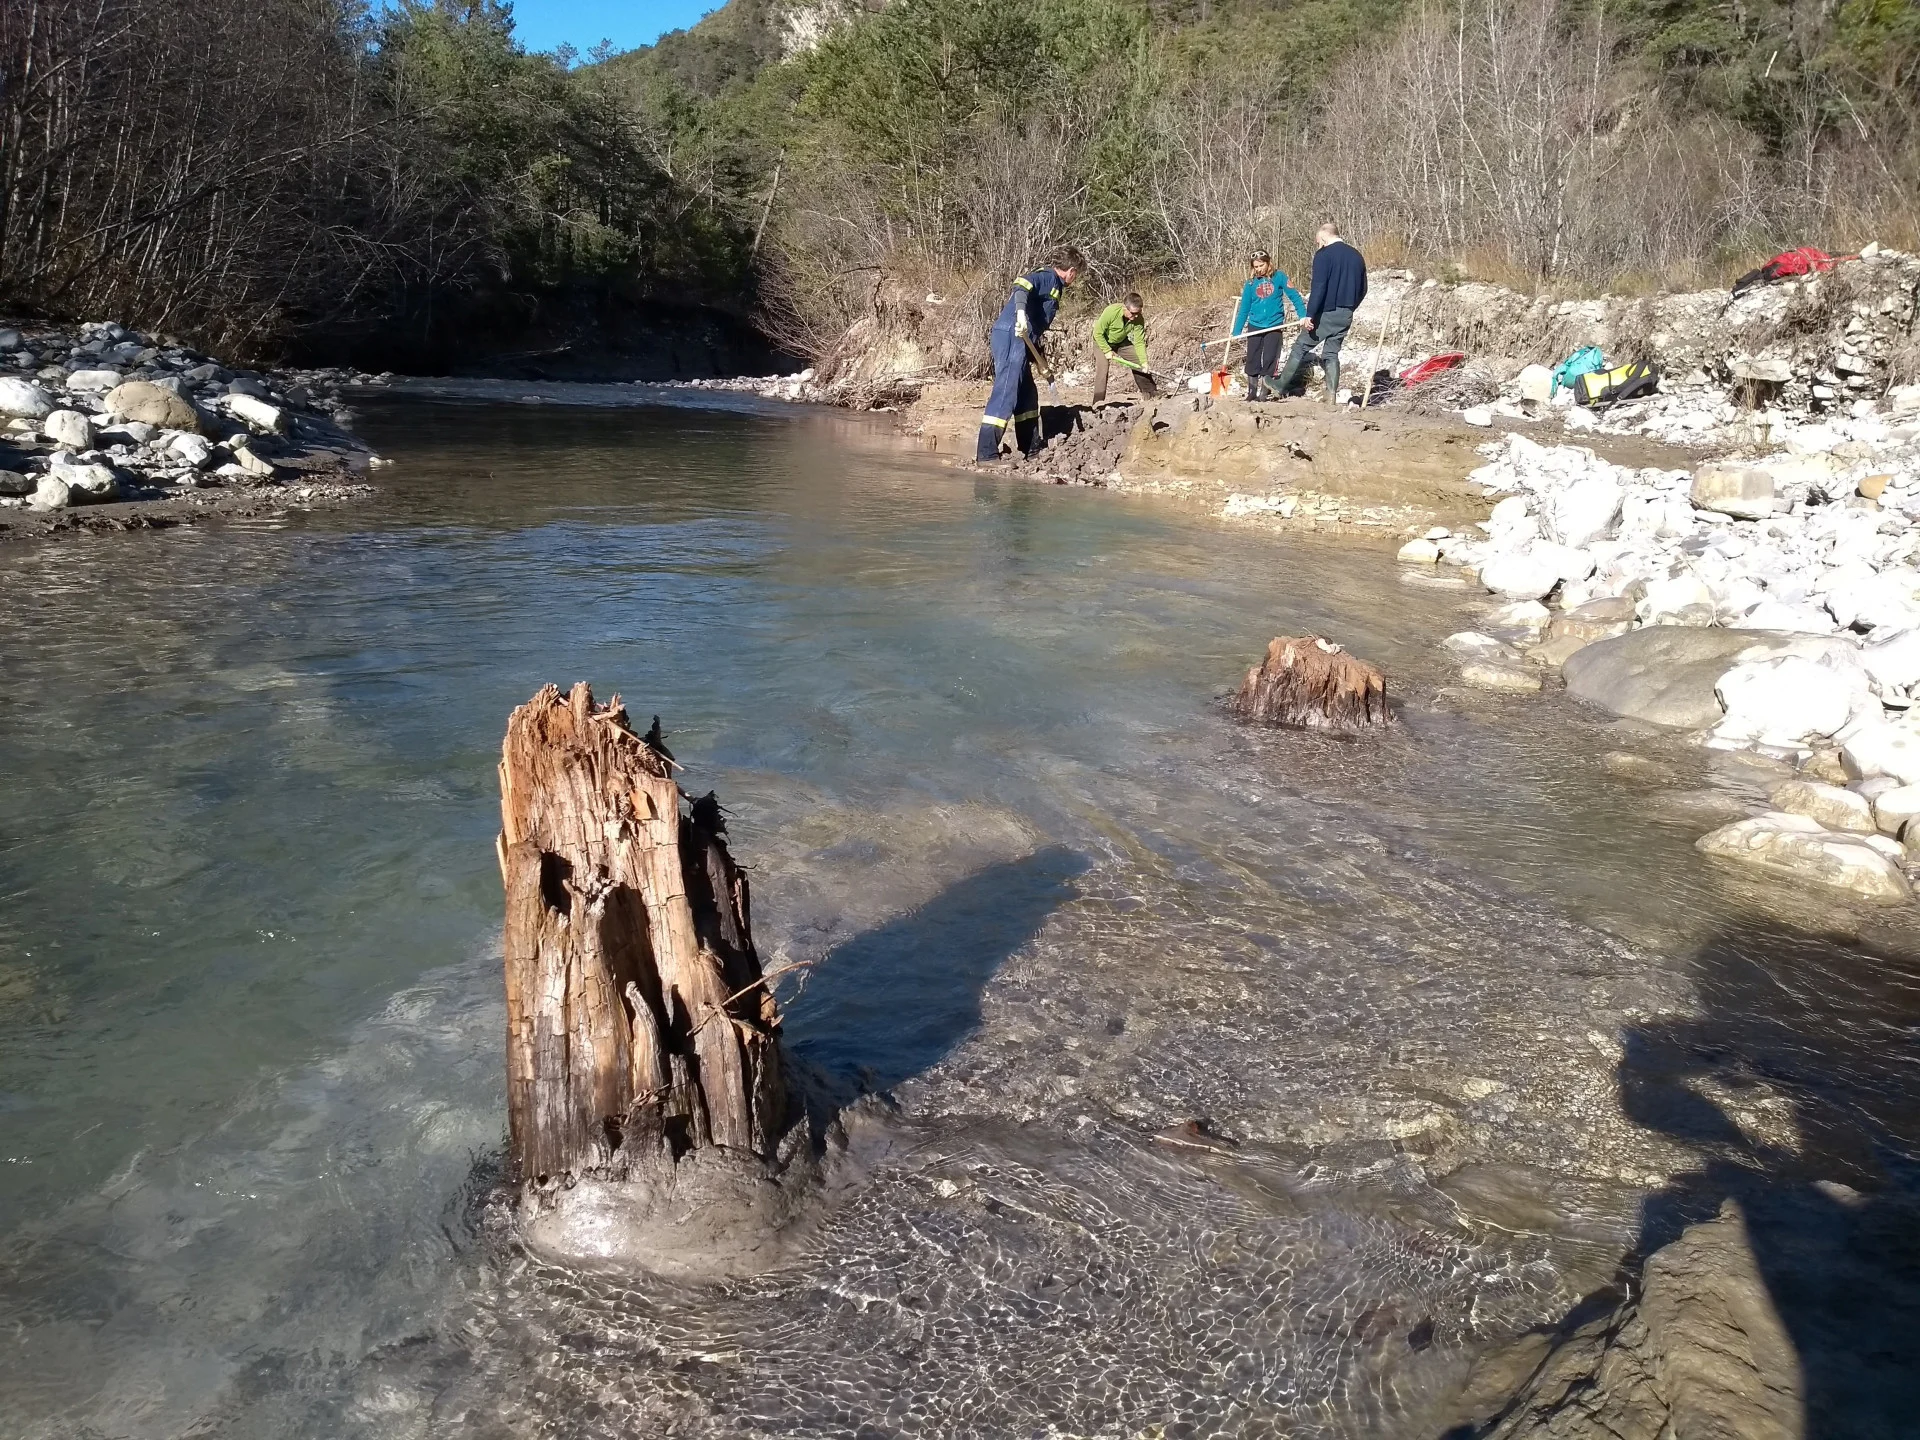 REUTERS: Subfossil Scots pine trees - tree remains whose fossilization process is not complete - are seen in the Drouzet river near Gap in the Southern French Alps in this handout photo taken in 2021. Cecile Miramont/Handout via REUTERS/File Photo